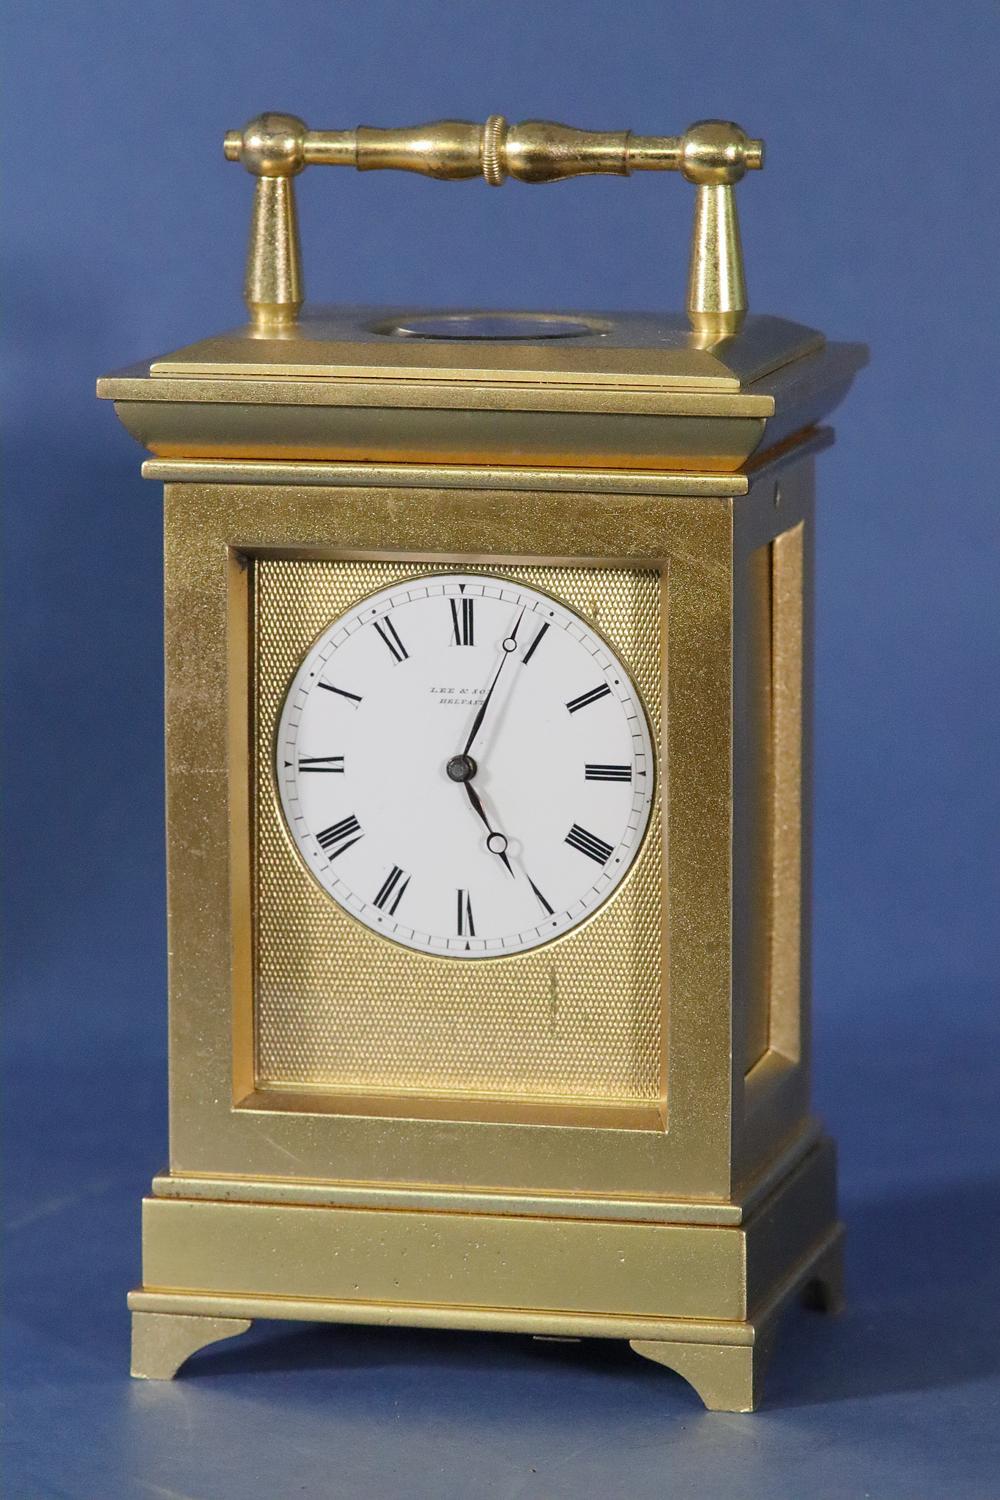 Lee & Son, Belfast – Retailer
 
The very heavy gilt-bronze case has a bollard handle, a glass viewing panel above, is stamped 1522 and has a pinned back door with the release on the bottom of the case.

The finely lettered white porcelain dial